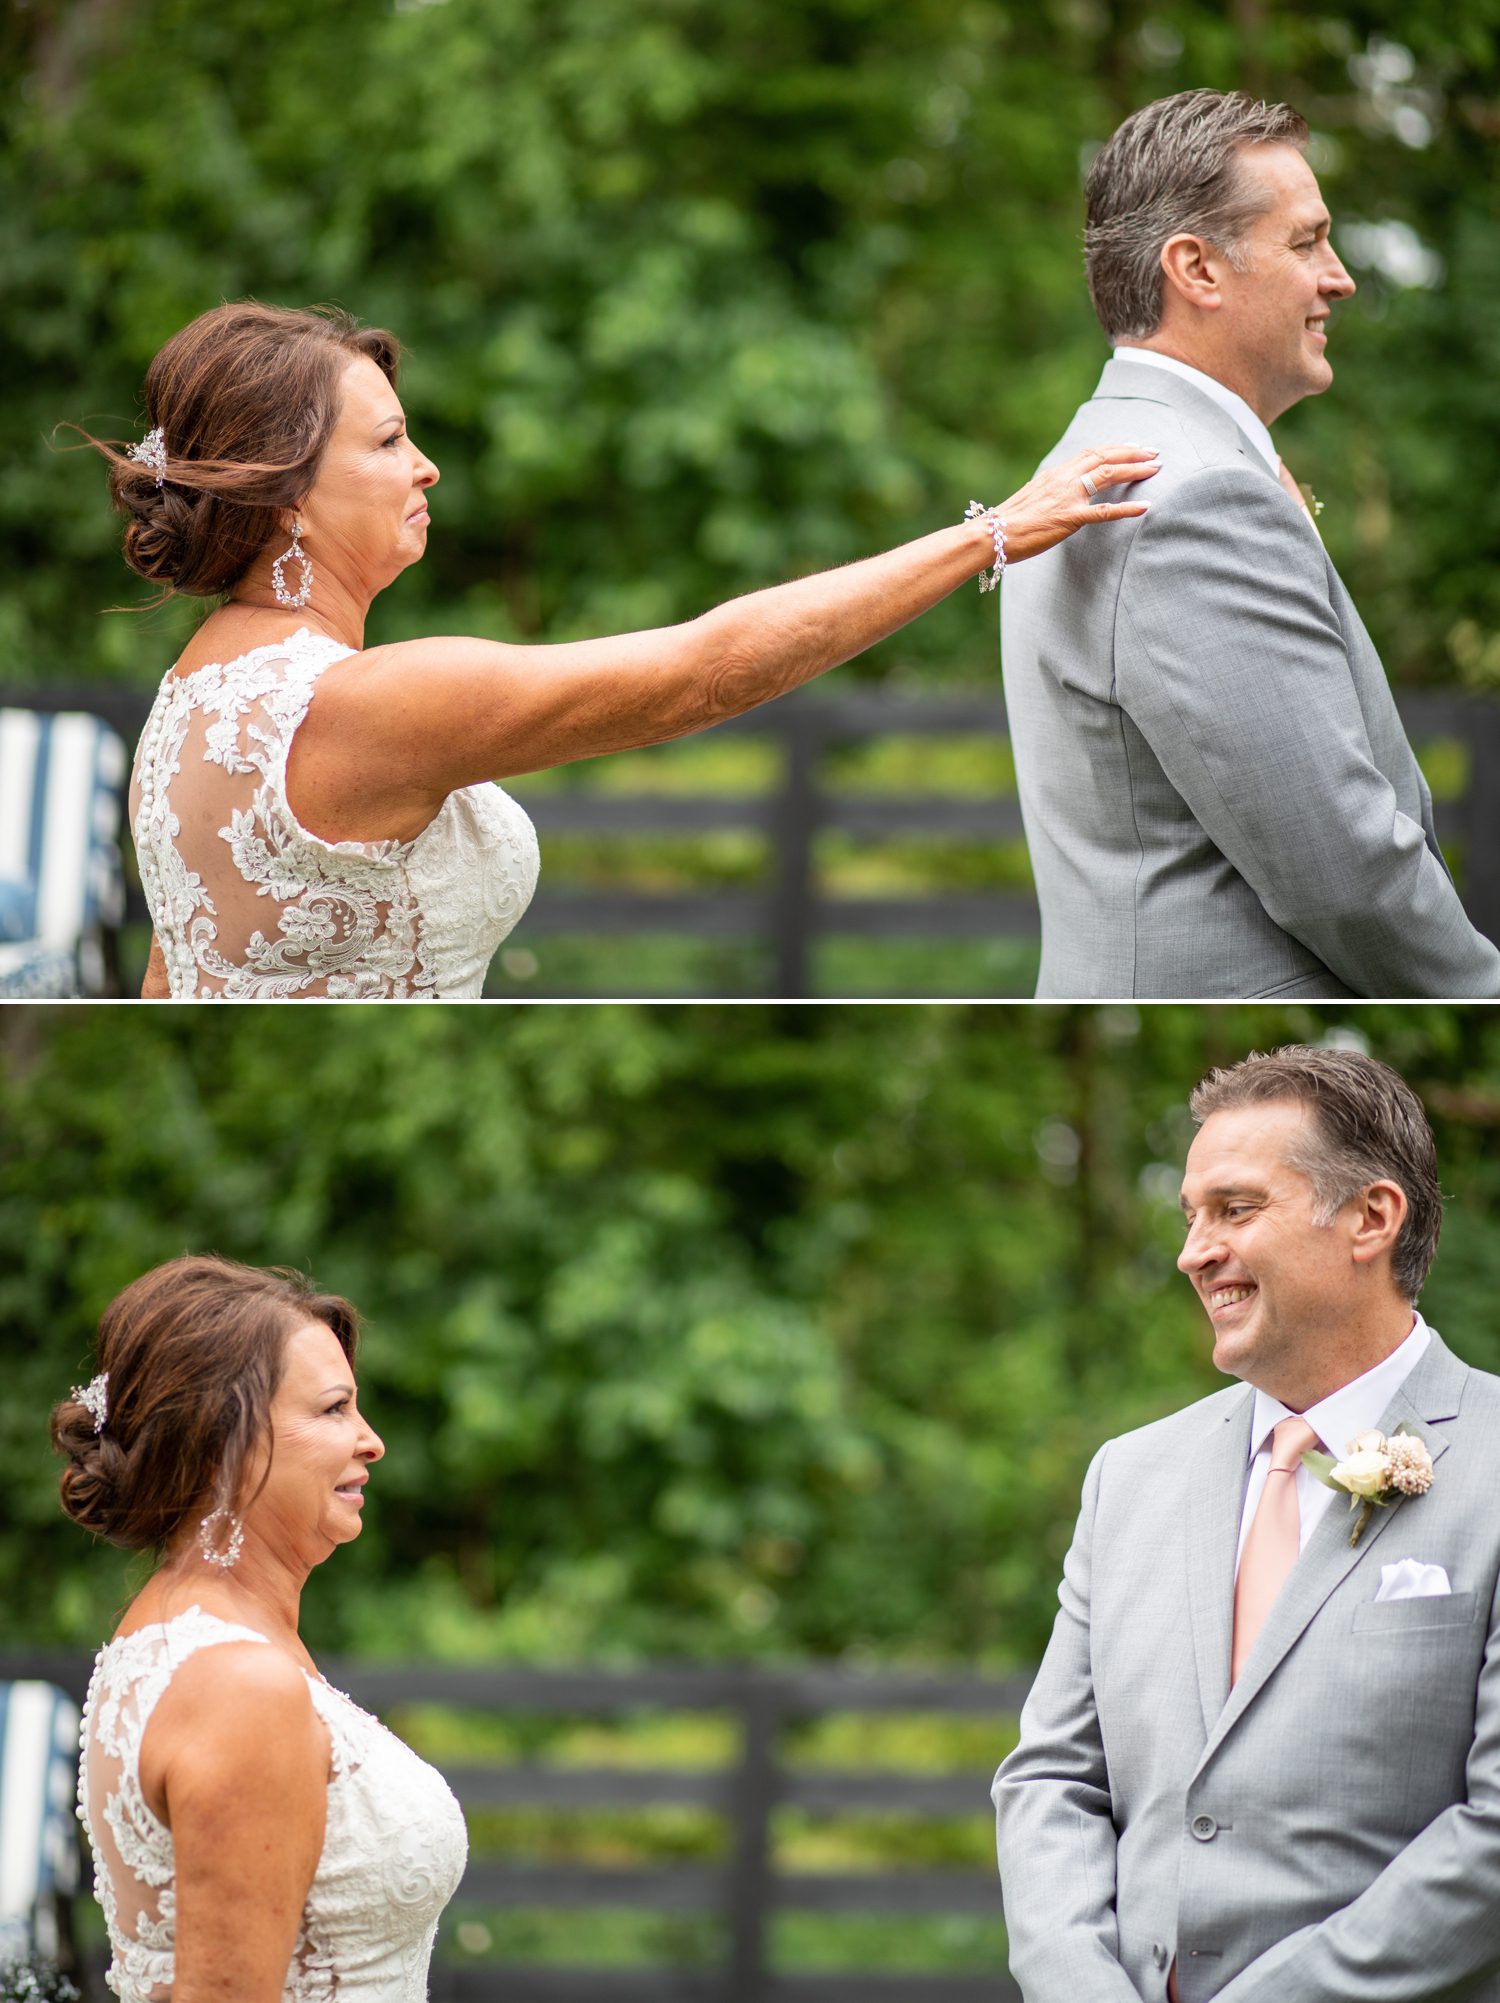 Luxury Estate Bellareed Farm Wedding in Franklin, TN First Look with Mature Bride and Groom